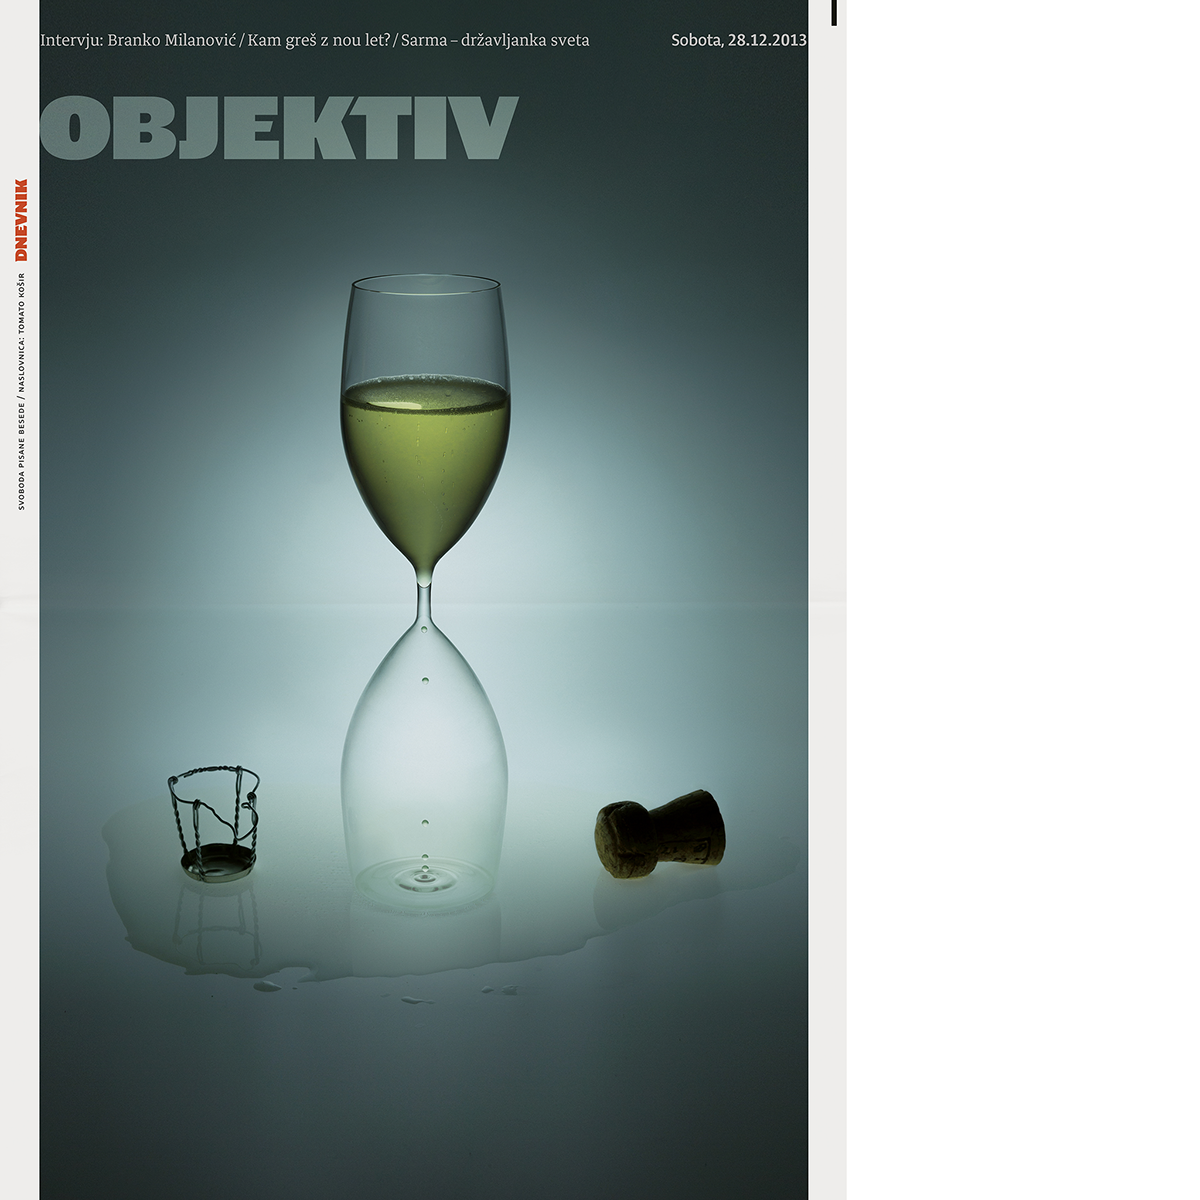 newspaper newspapers cover covers visual comentary political provocative Minimalism photoillustration TomatoKosir magazine frontpage ADC award